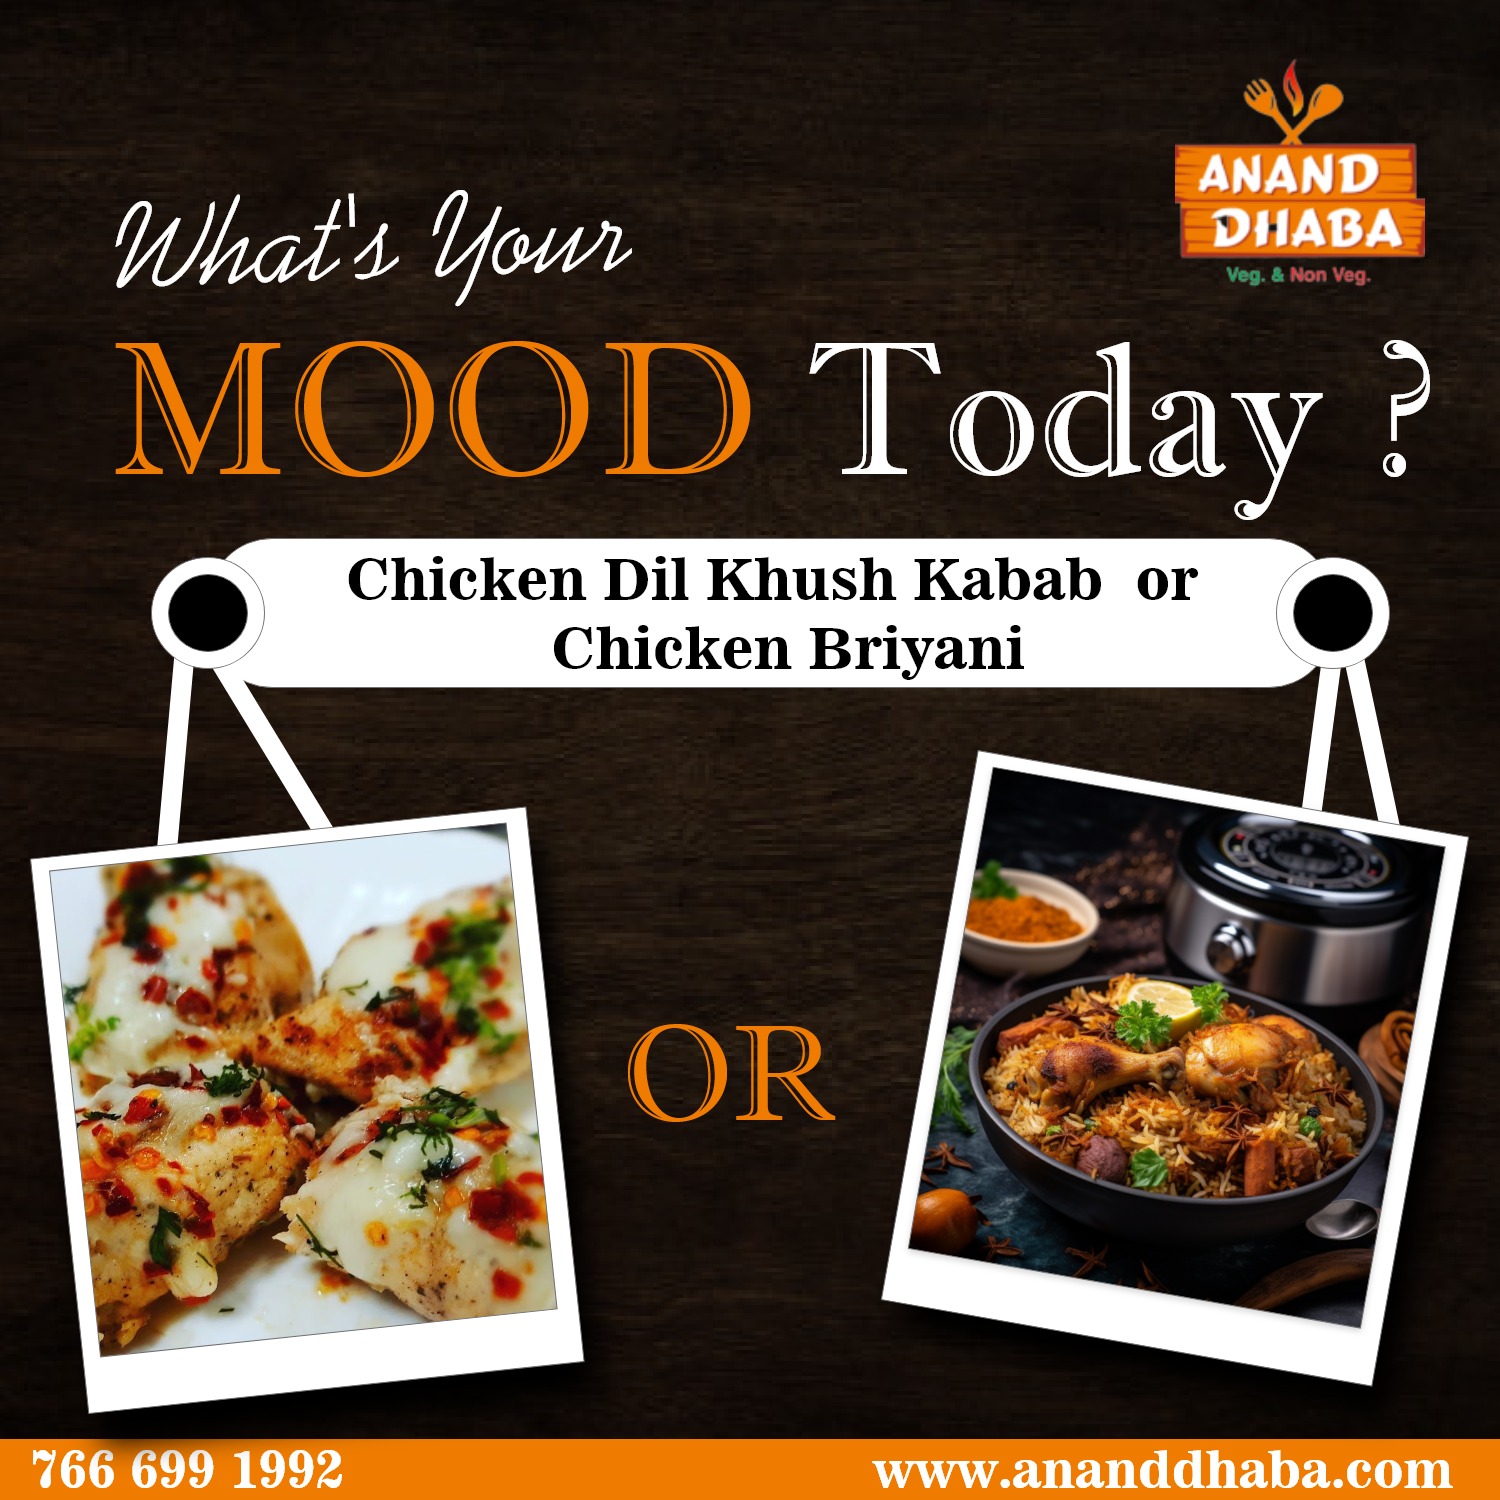 At Anand Dhaba: What's Your MOOD Today